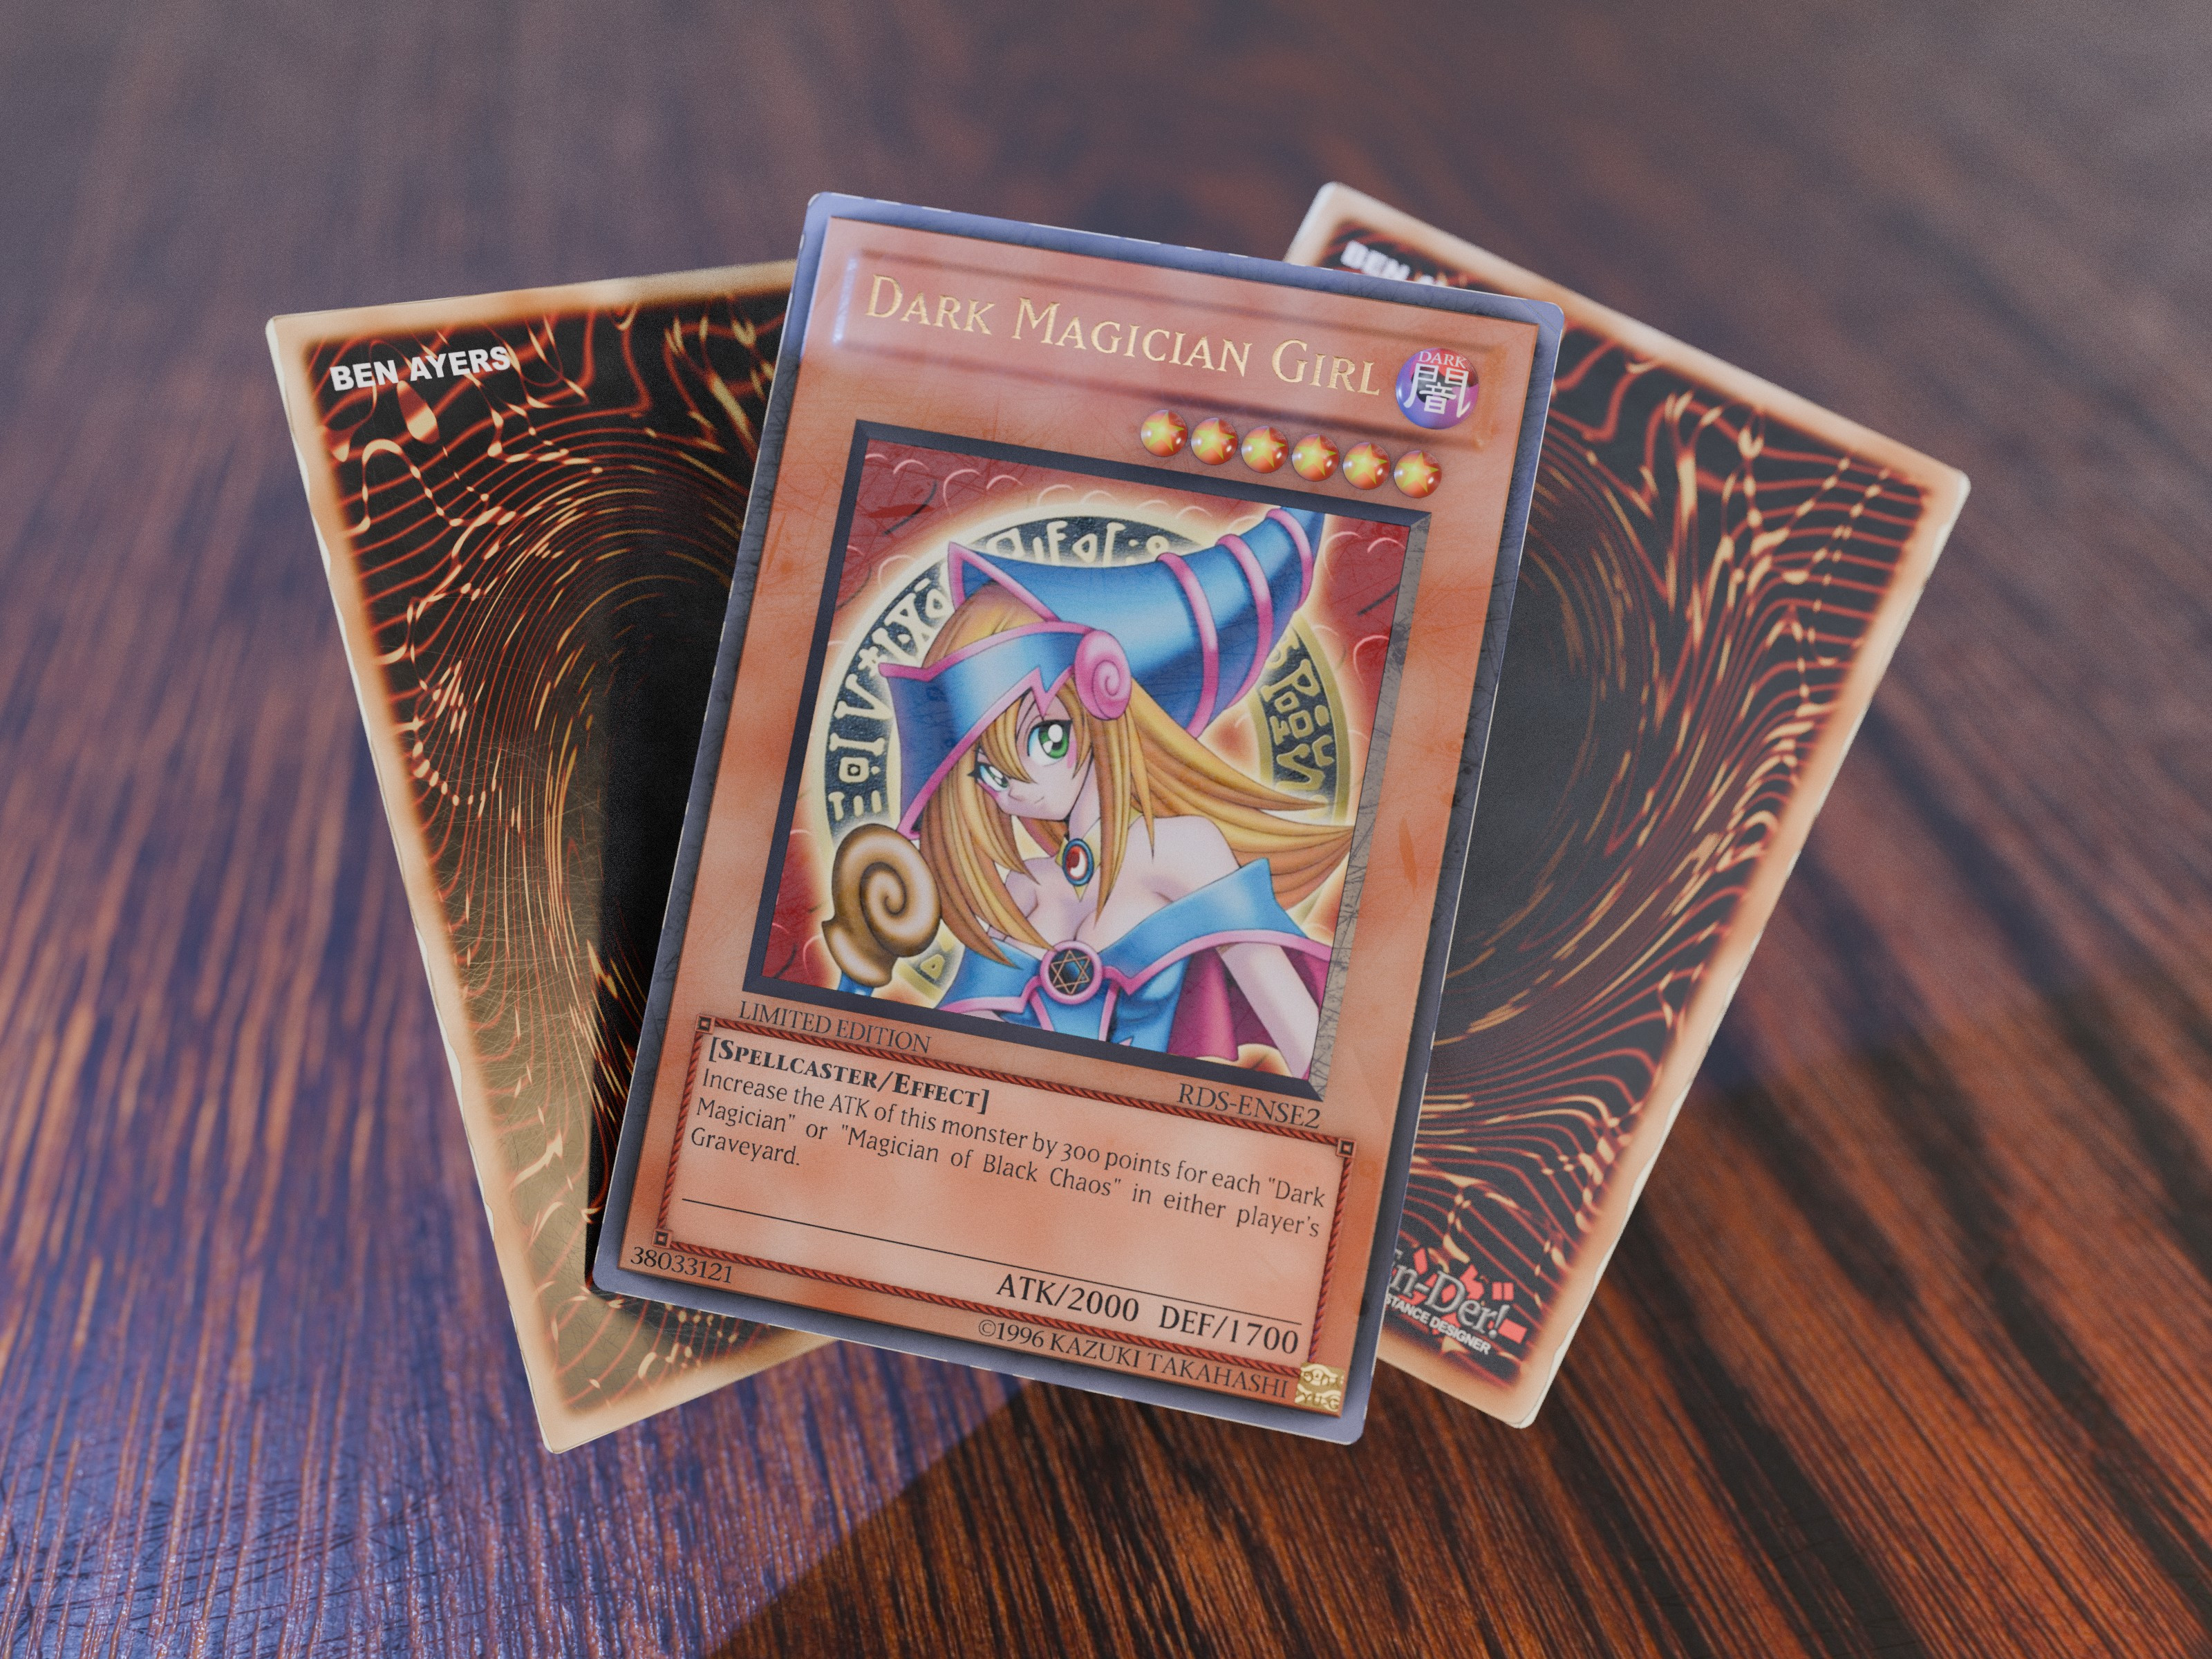 A version using the official card art.